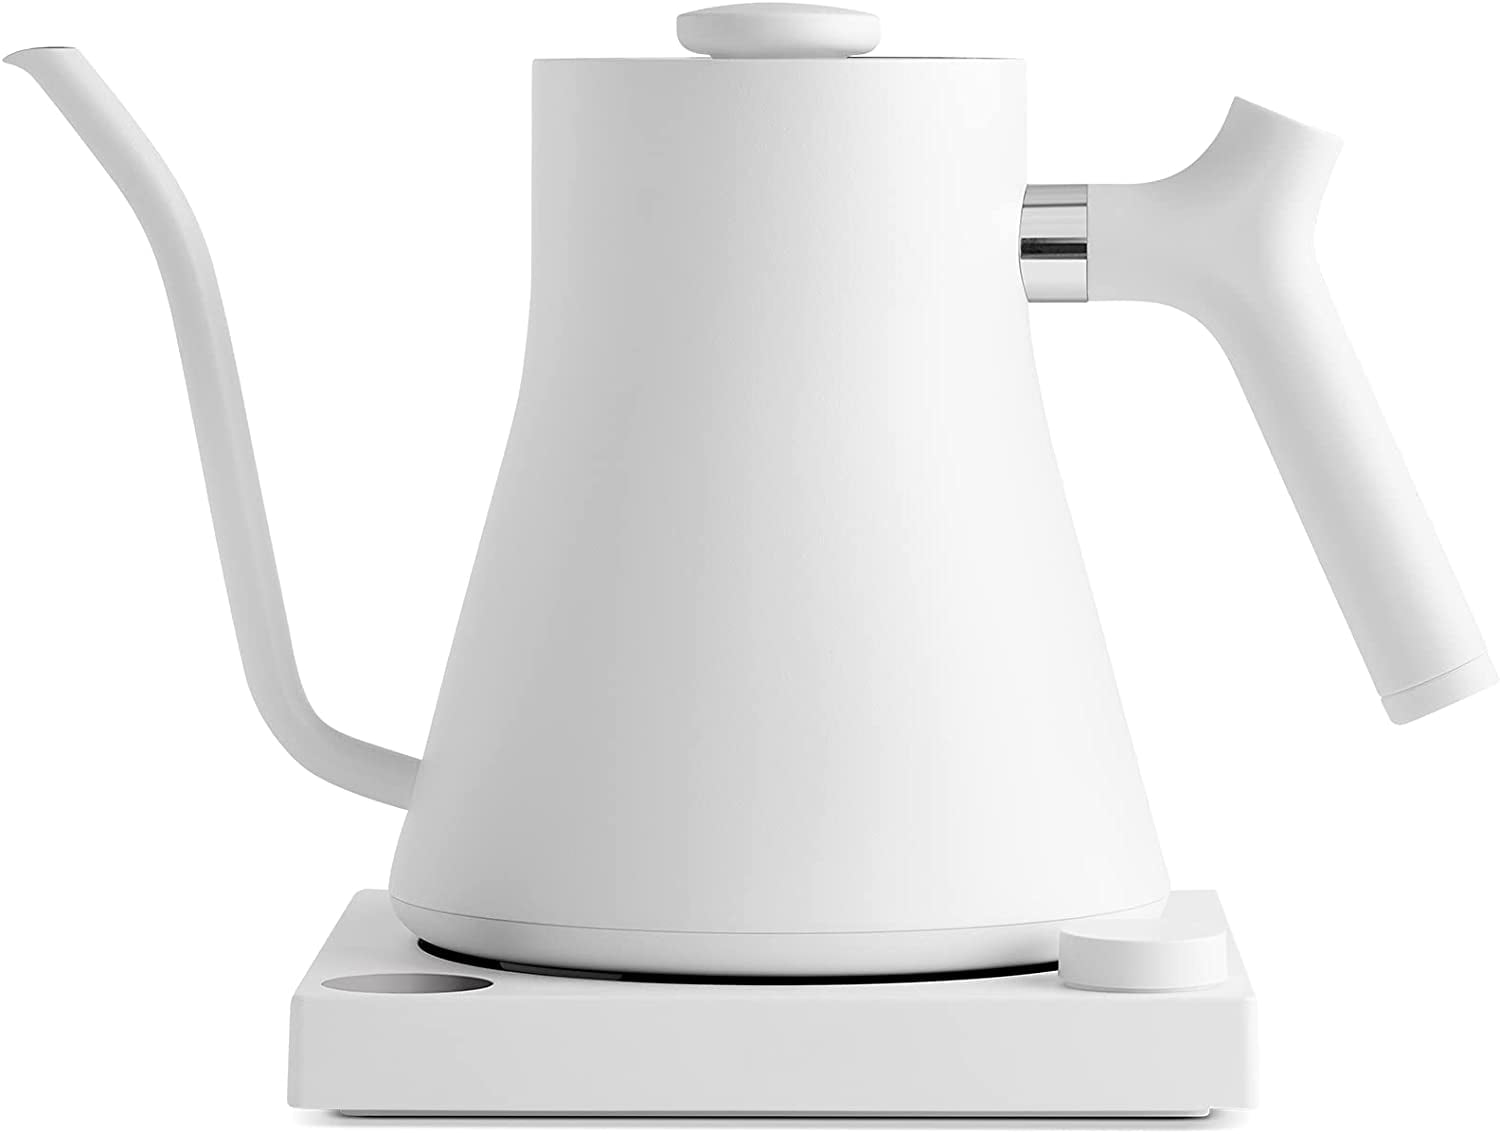 Fellow Stagg Stovetop Pour-Over Coffee and Tea Kettle - Gooseneck Teapot  with Precision Pour Spout, Built-In Thermometer, Matte White, 1 Liter -  Yahoo Shopping